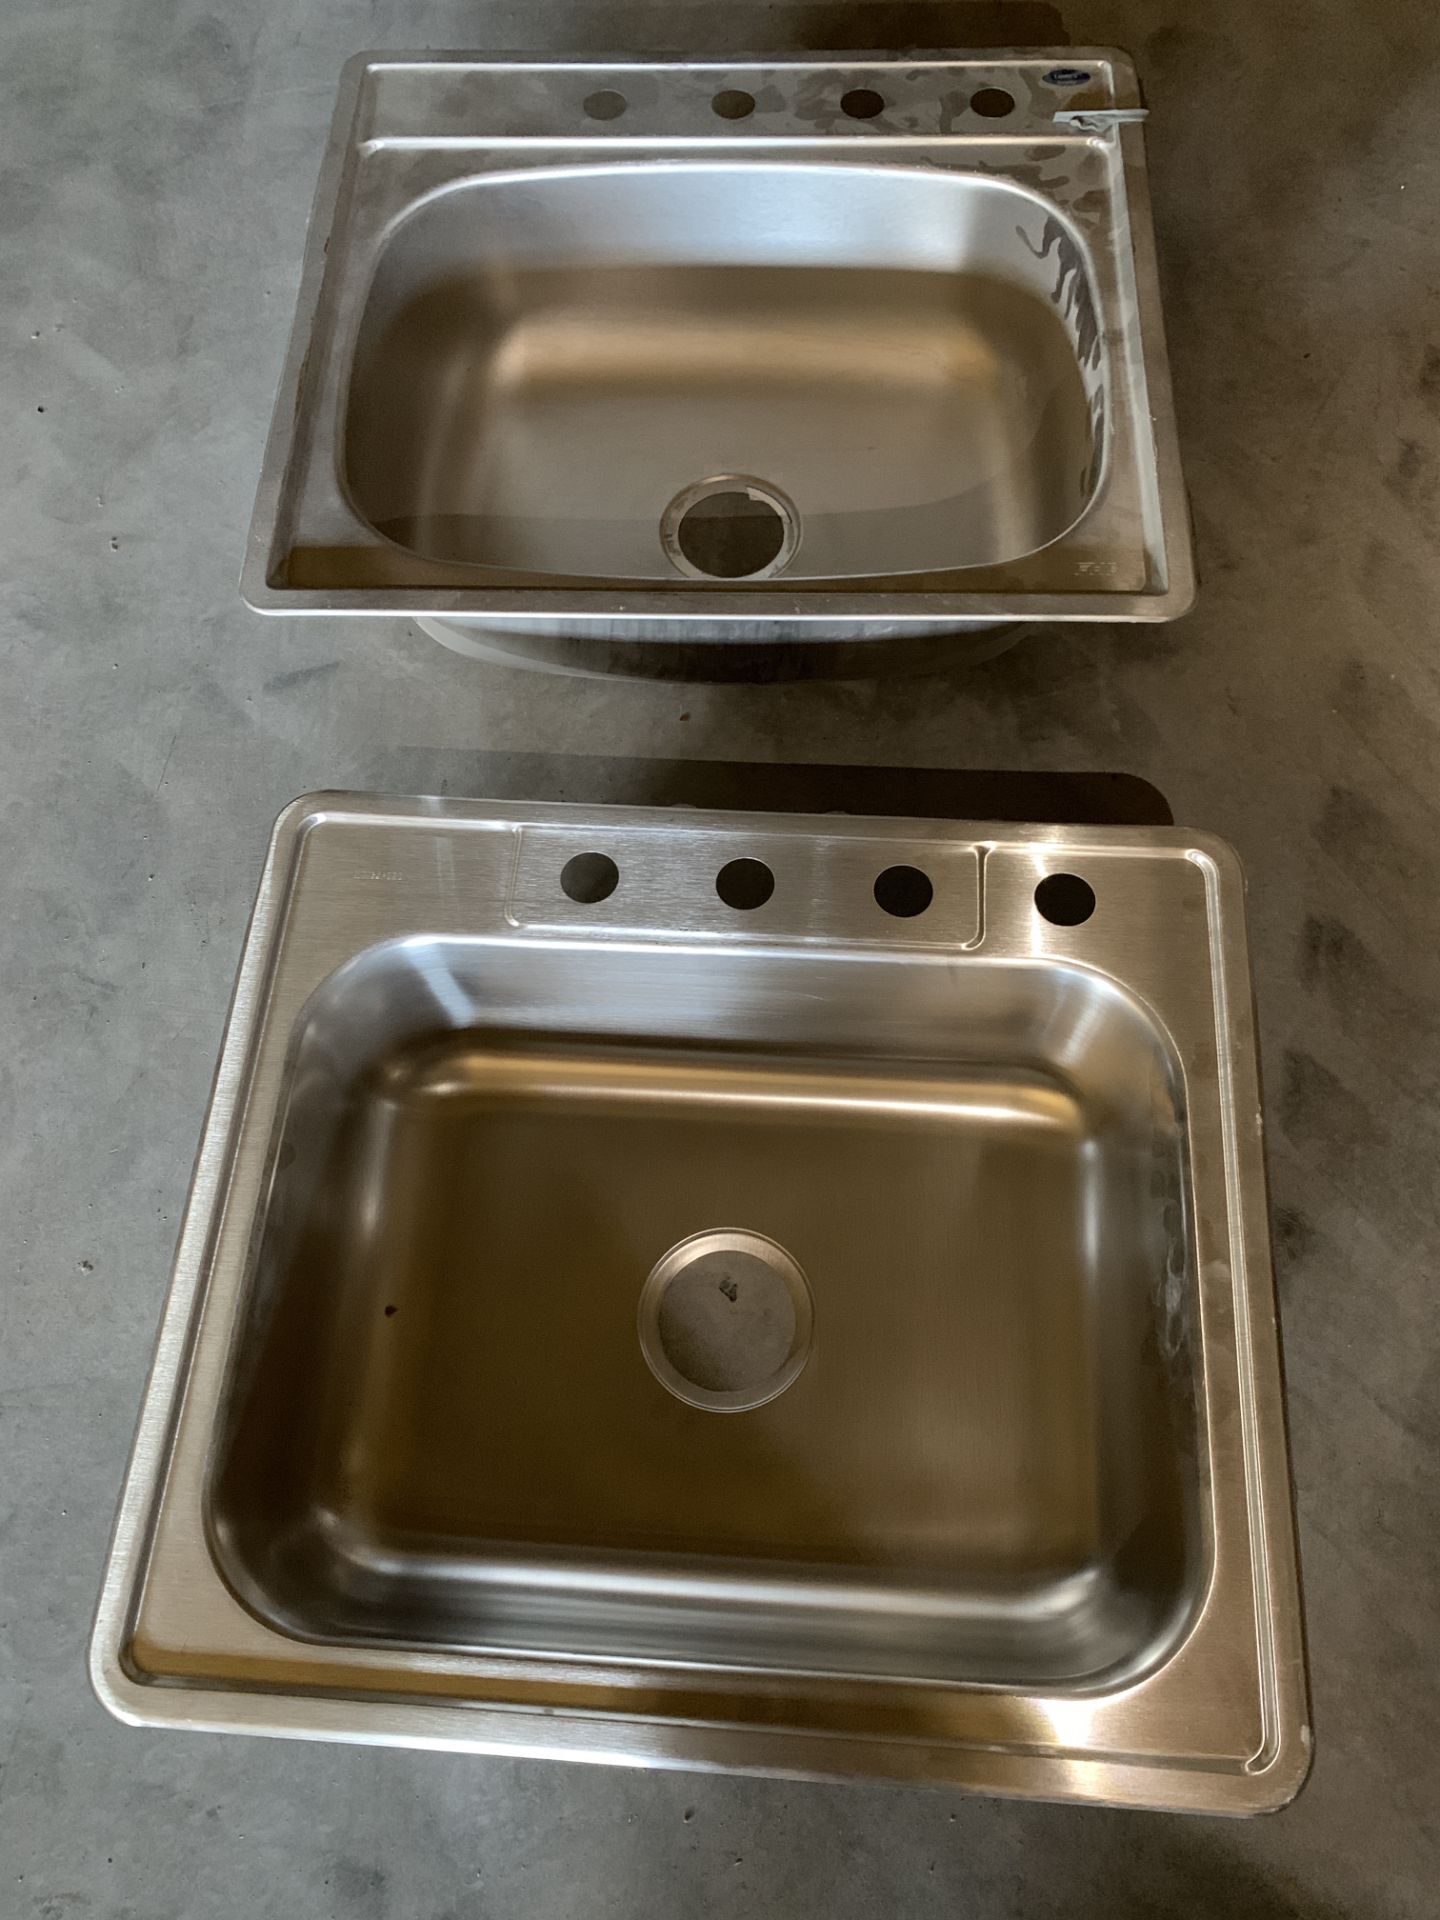 2x Lowes Stainless Steel Kitchen Sinks, New